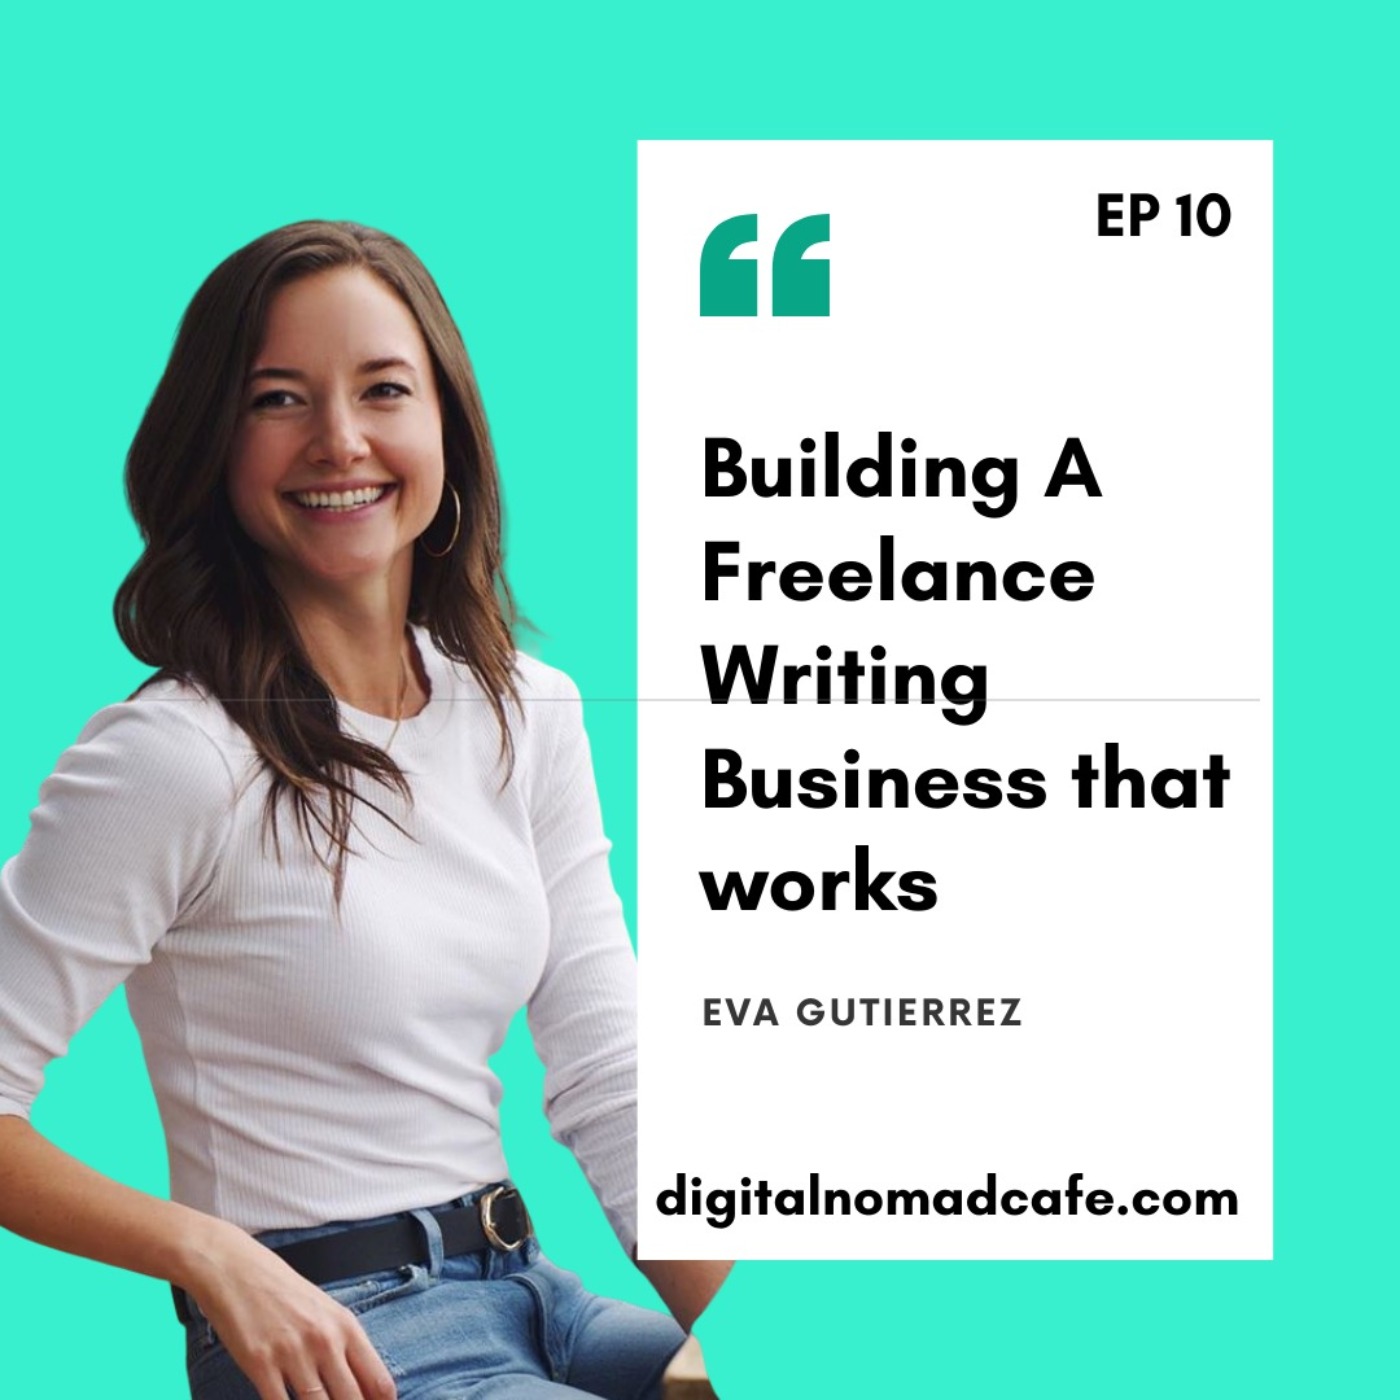 EP10: Building A Freelance Writing Business that works with Eva Gutierrez